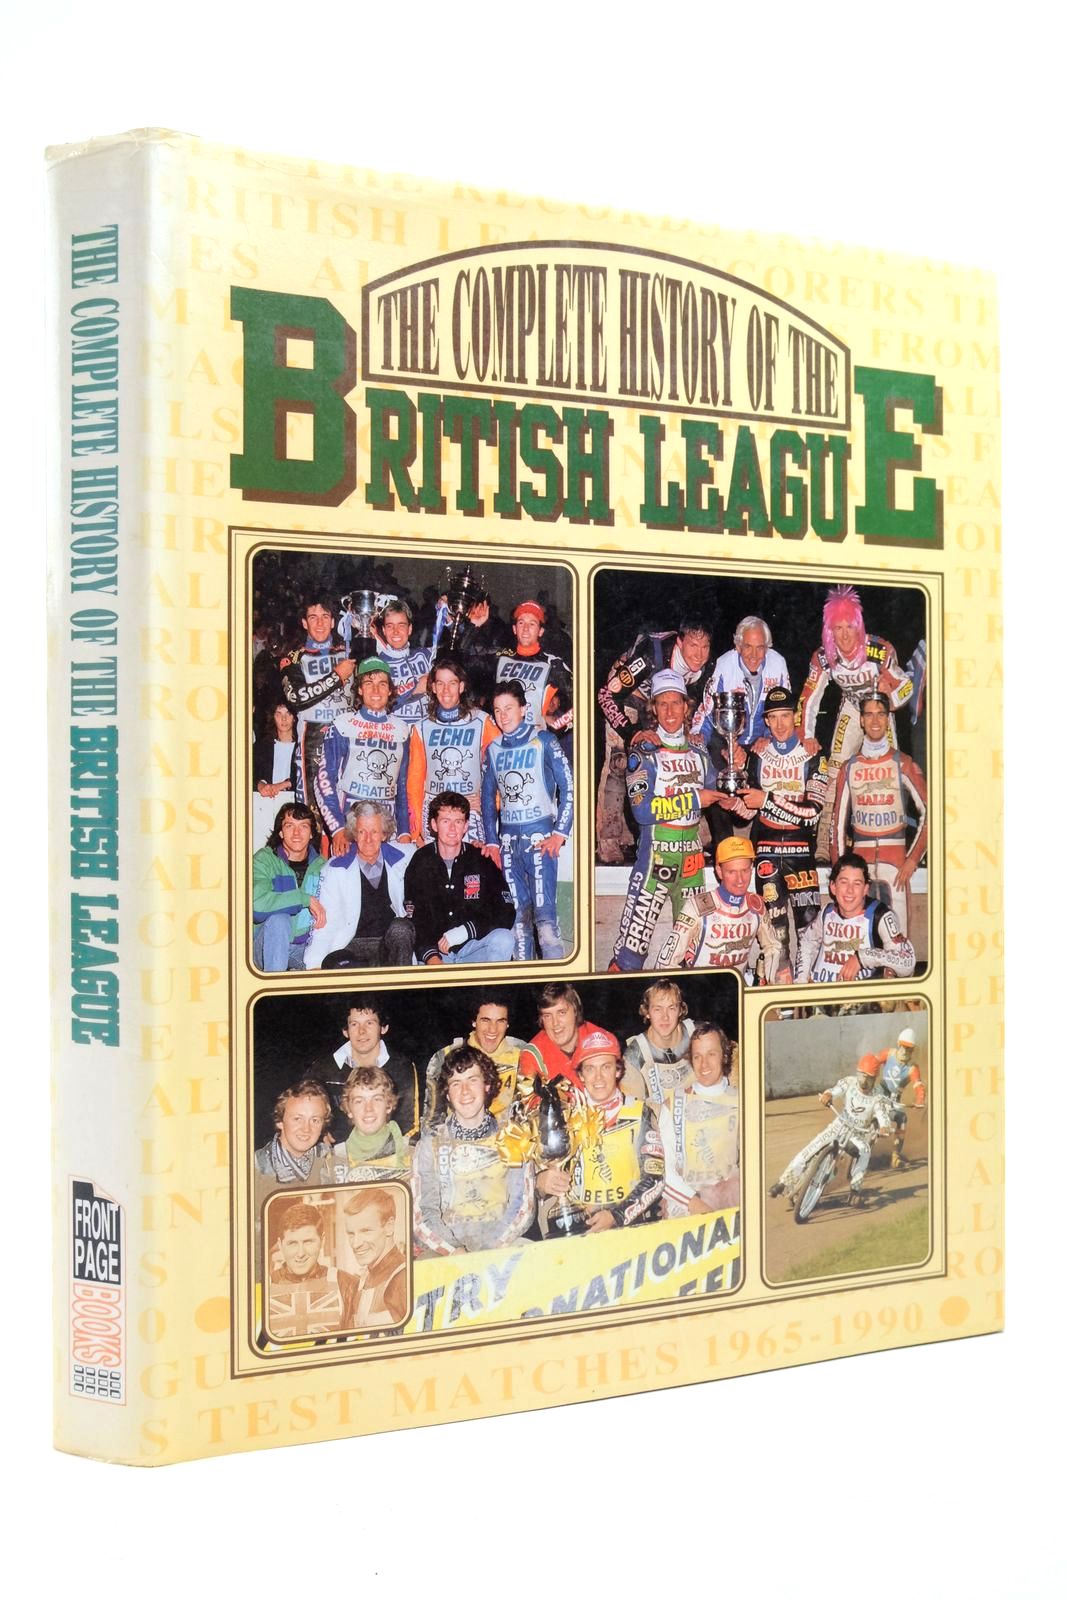 Photo of THE COMPLETE HISTORY OF THE BRITISH LEAGUE written by Oakes, Peter published by Front Page Books (STOCK CODE: 2138922)  for sale by Stella & Rose's Books